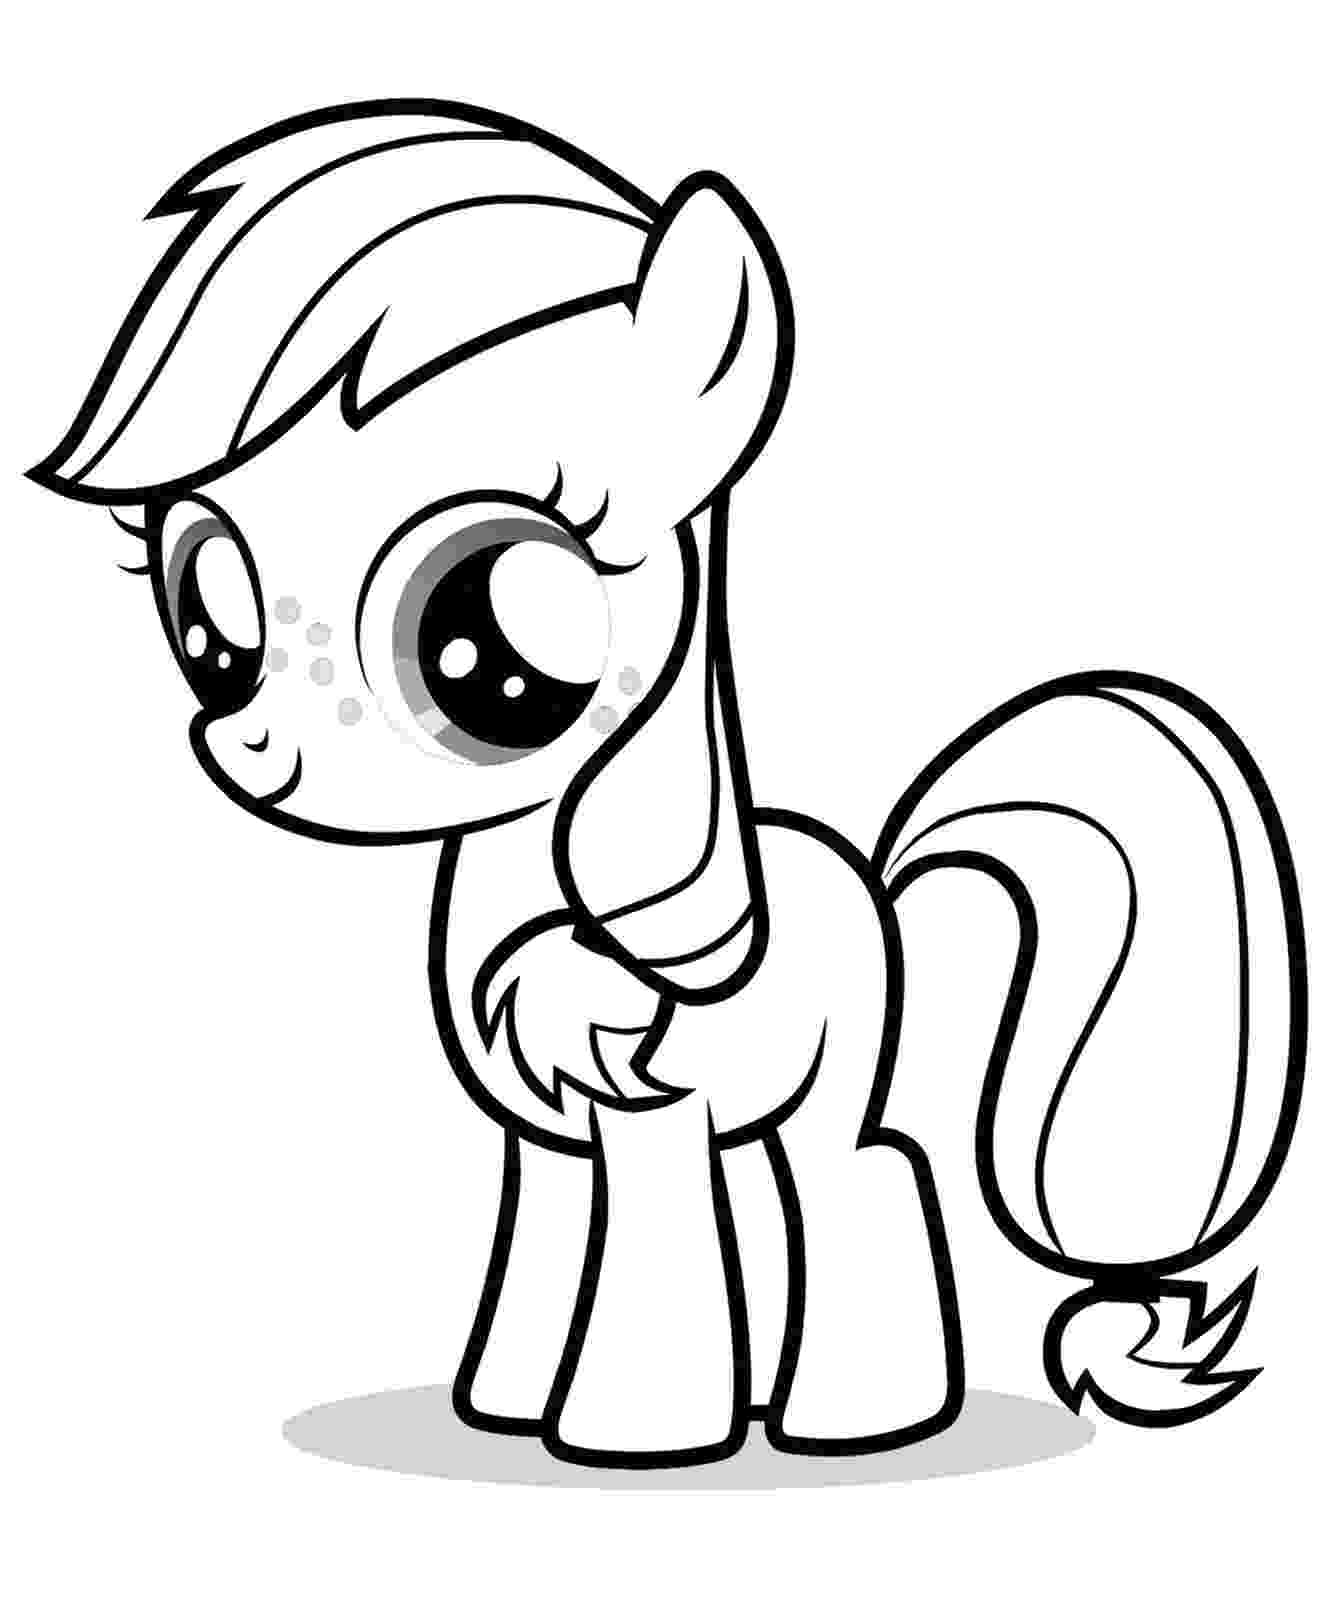 my little pony apple bloom coloring pages my little pony apple bloom coloring pages coloring pages pony bloom little apple my 